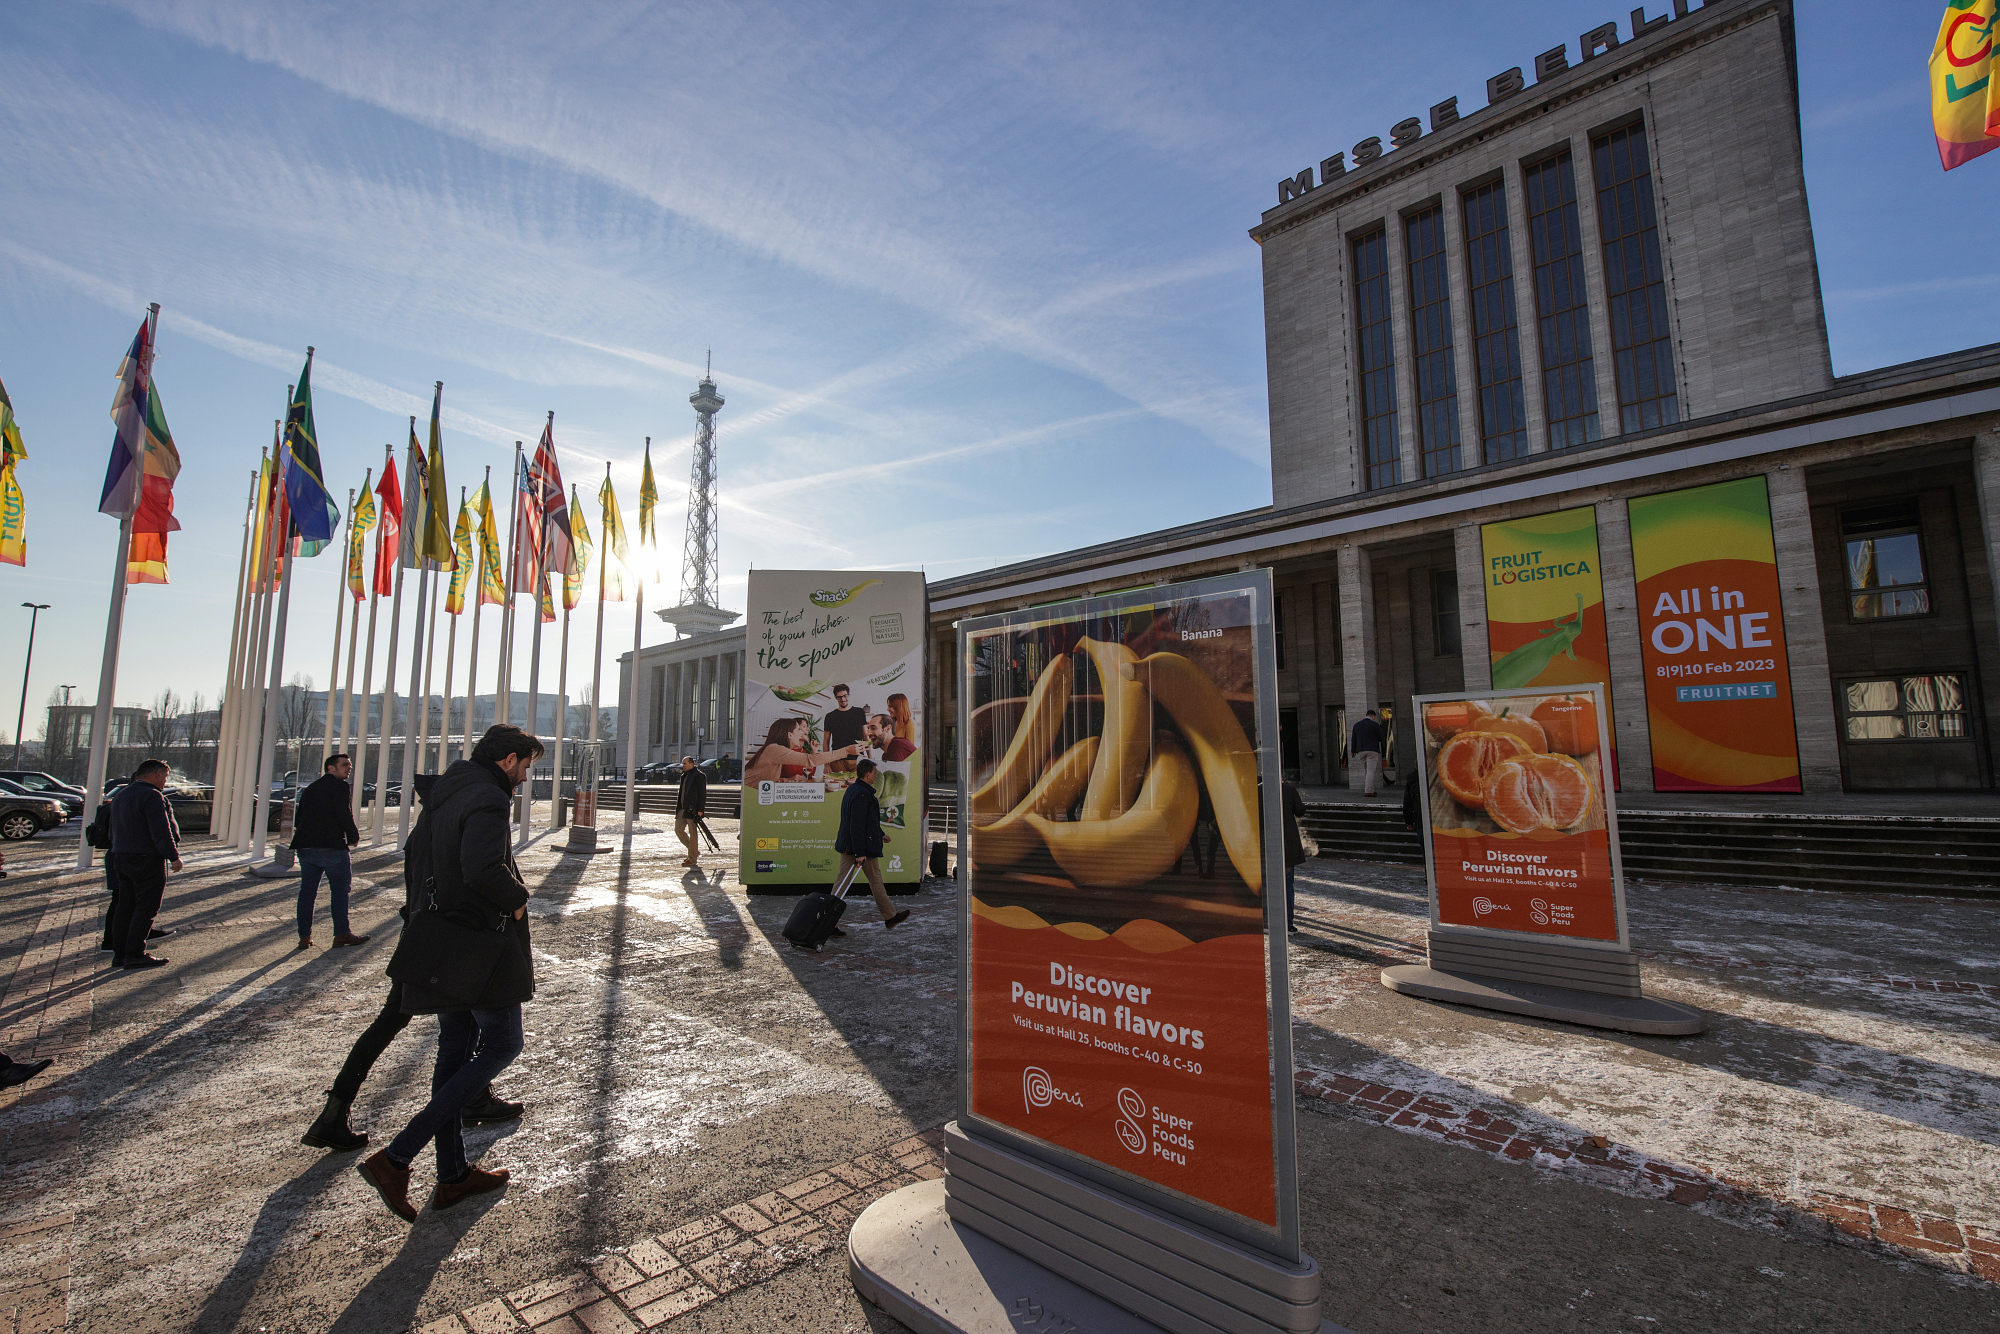 The photo shows a long shot of the Messe Berlin North Entrance with country flags and FRUIT LOGISTICA 2023 displays. People are walking by.